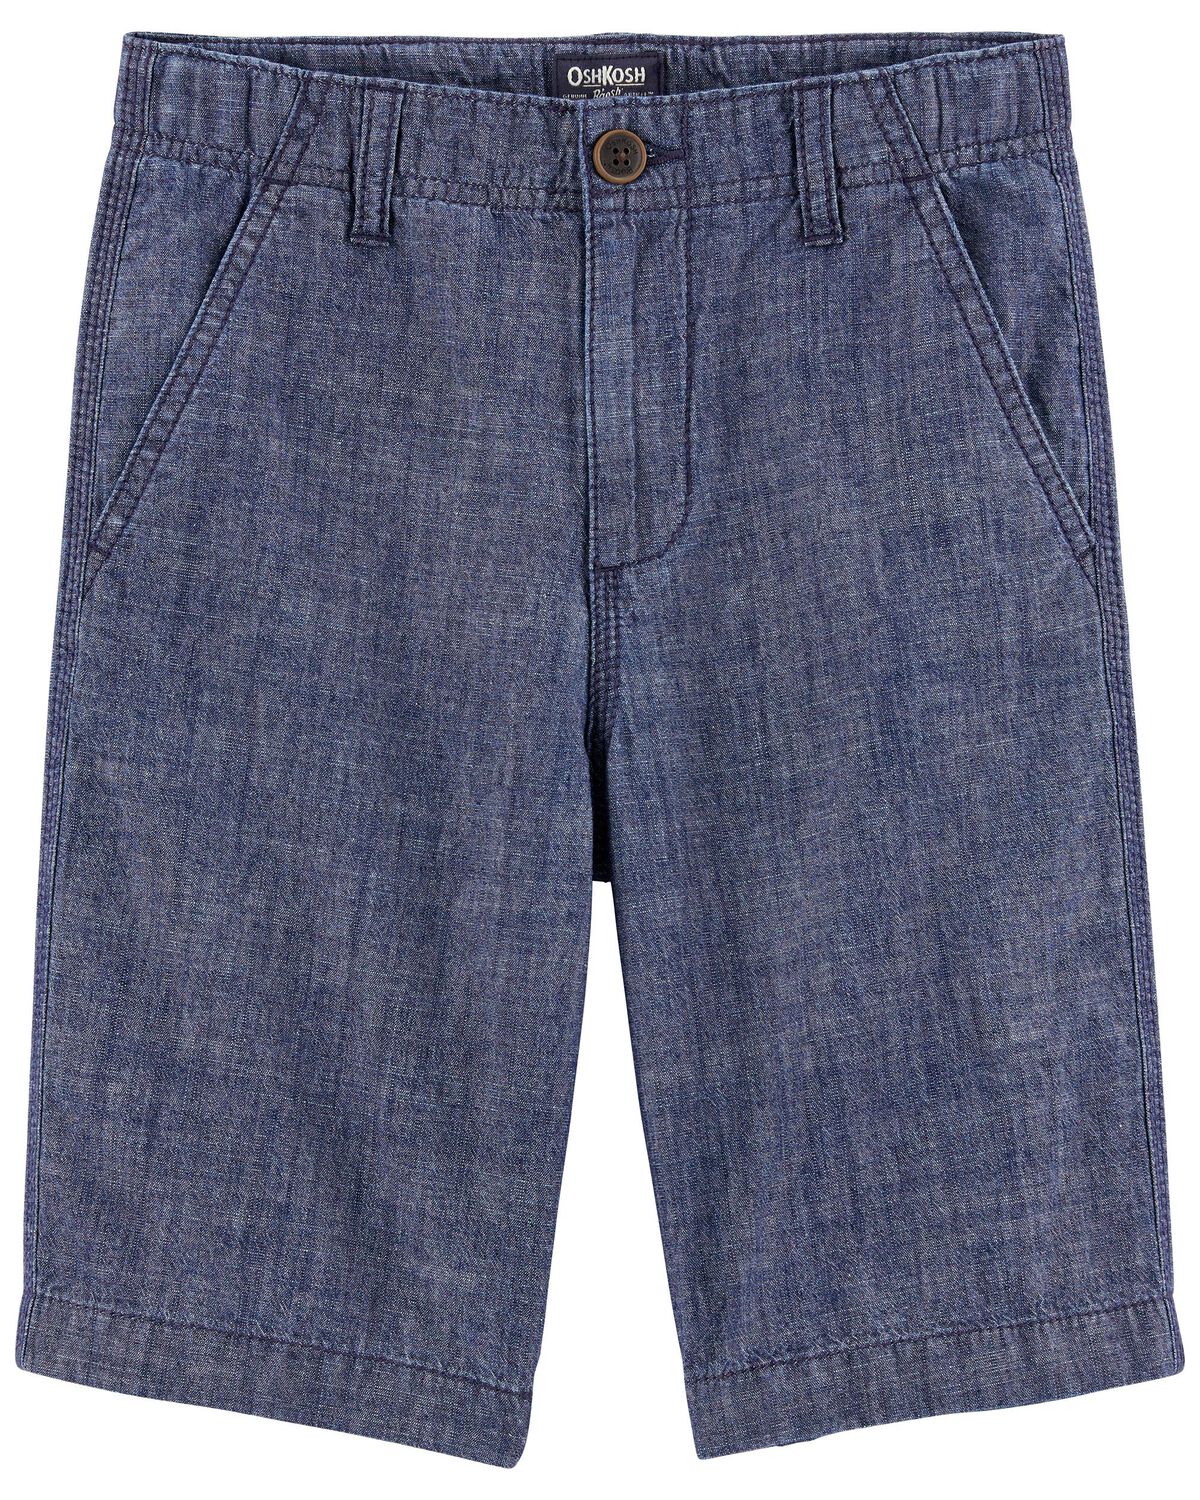 Salisbury Wash Kid Relaxed Fit Cotton Chambray Shorts | carters.com